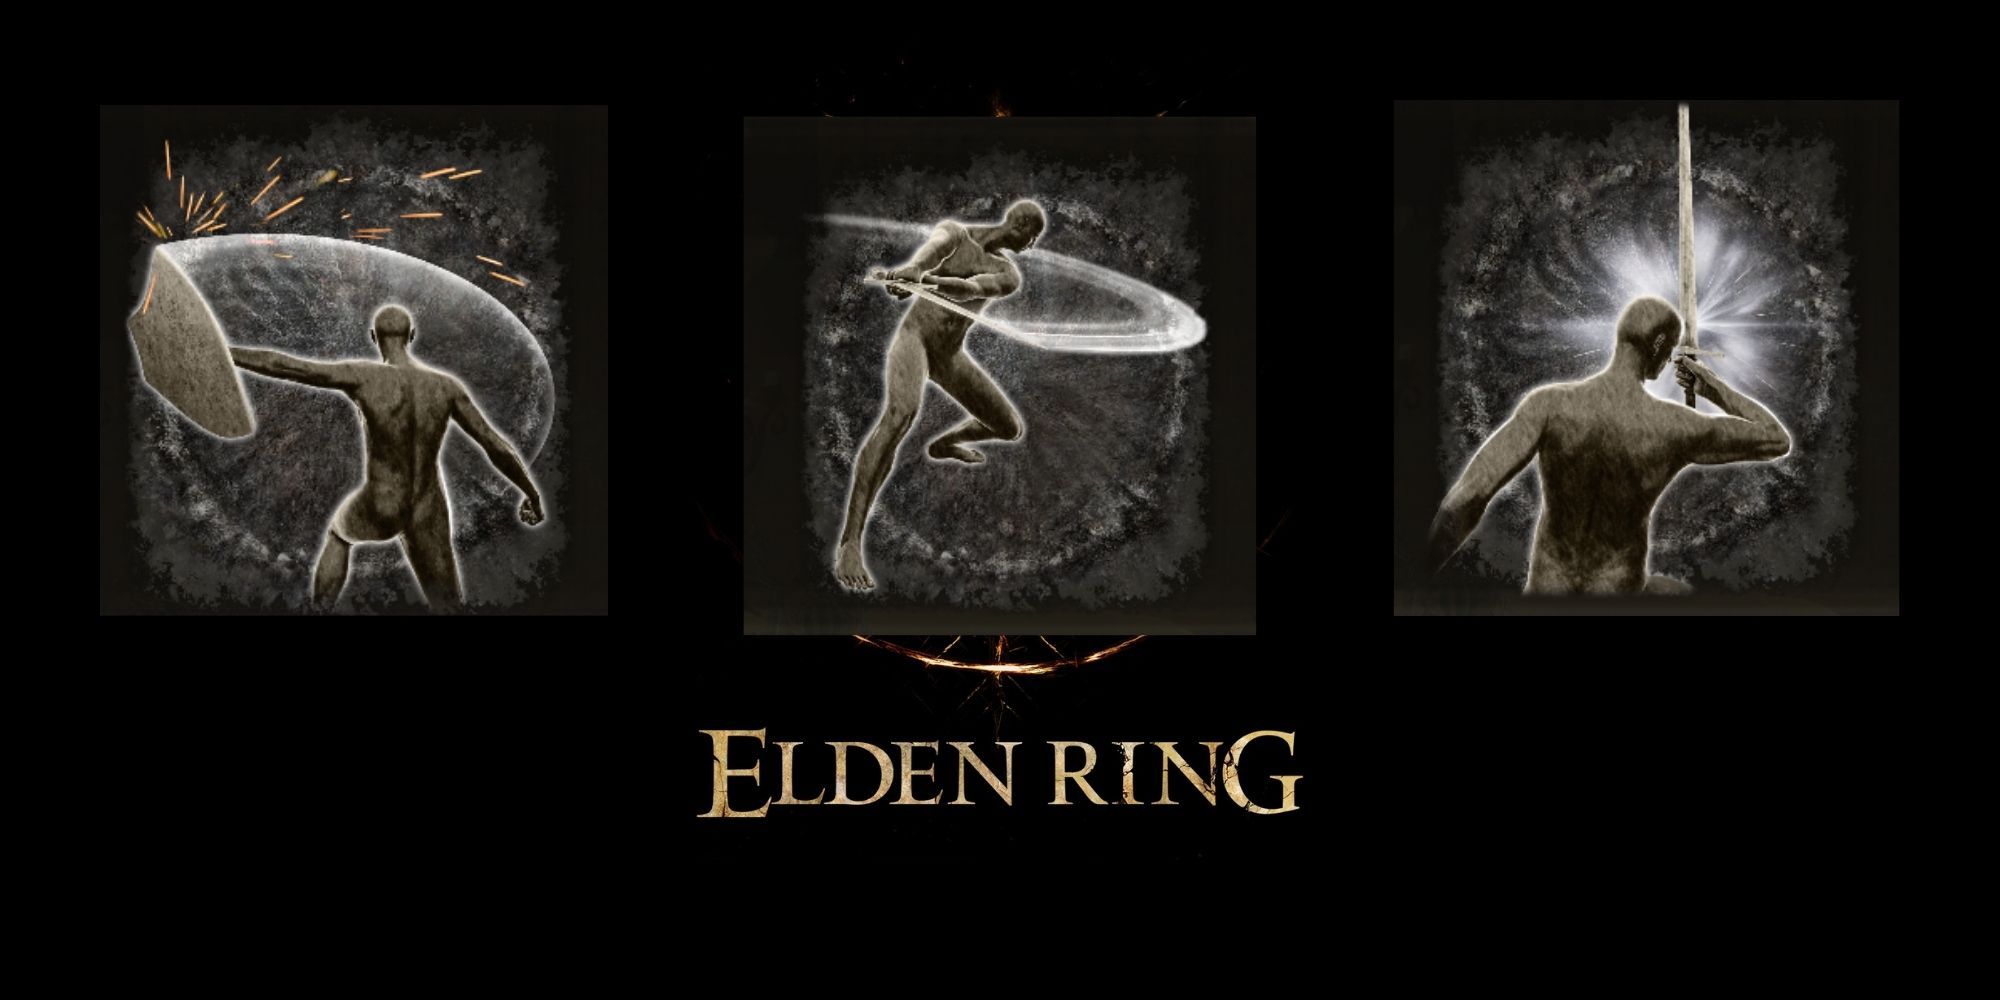 The Elden Ring logo with three Skills icons superimposed on top.